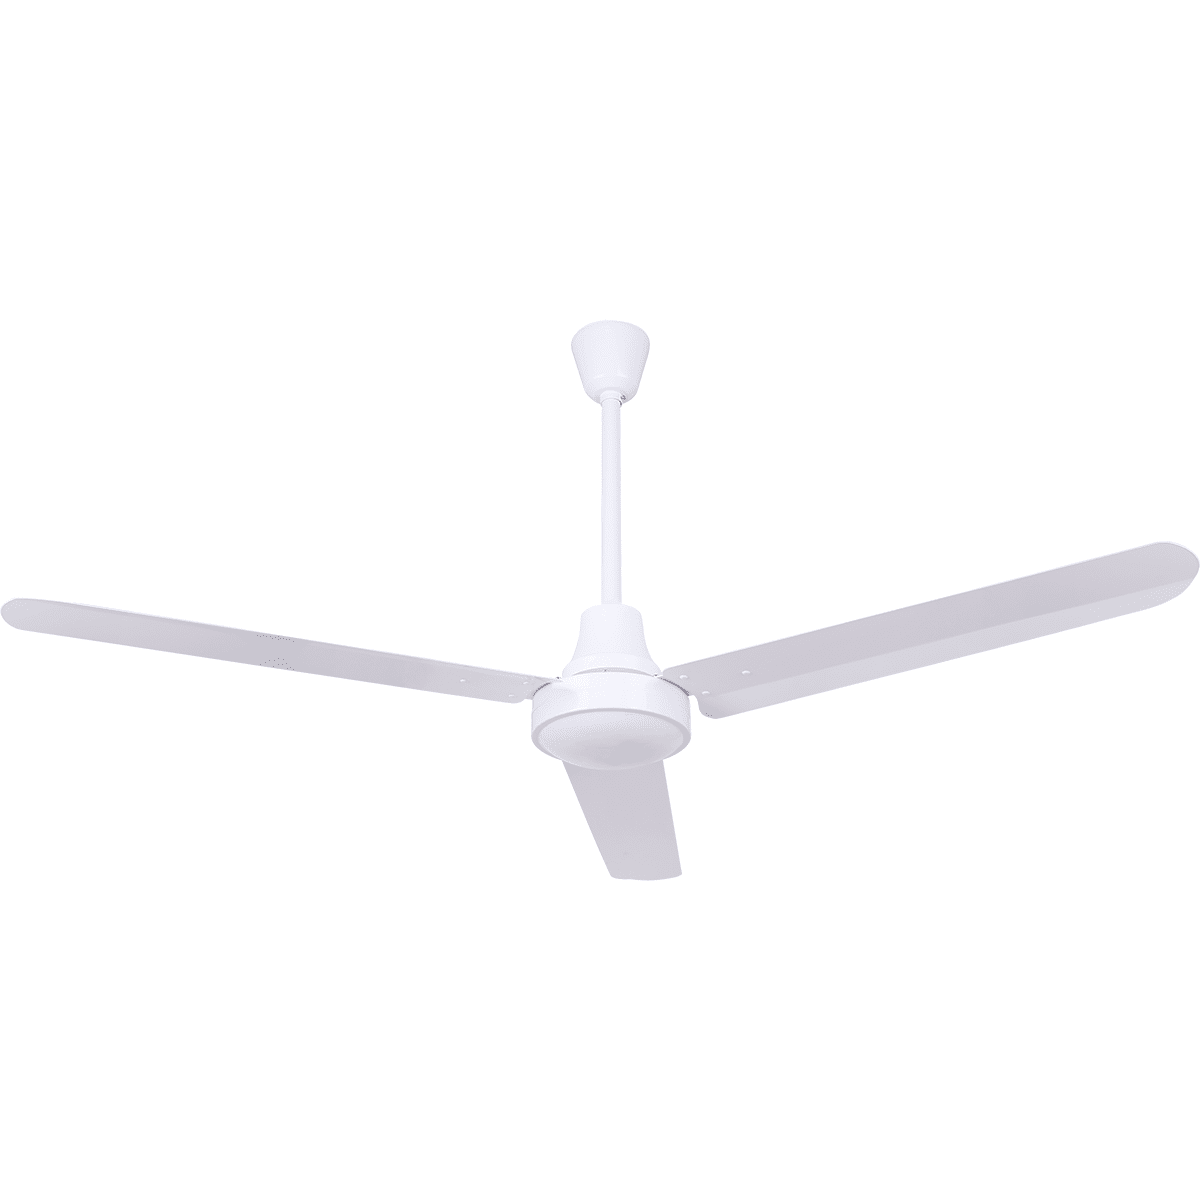 Canarm High Performance Weather Proof DC Industrial Fan - 48-in White